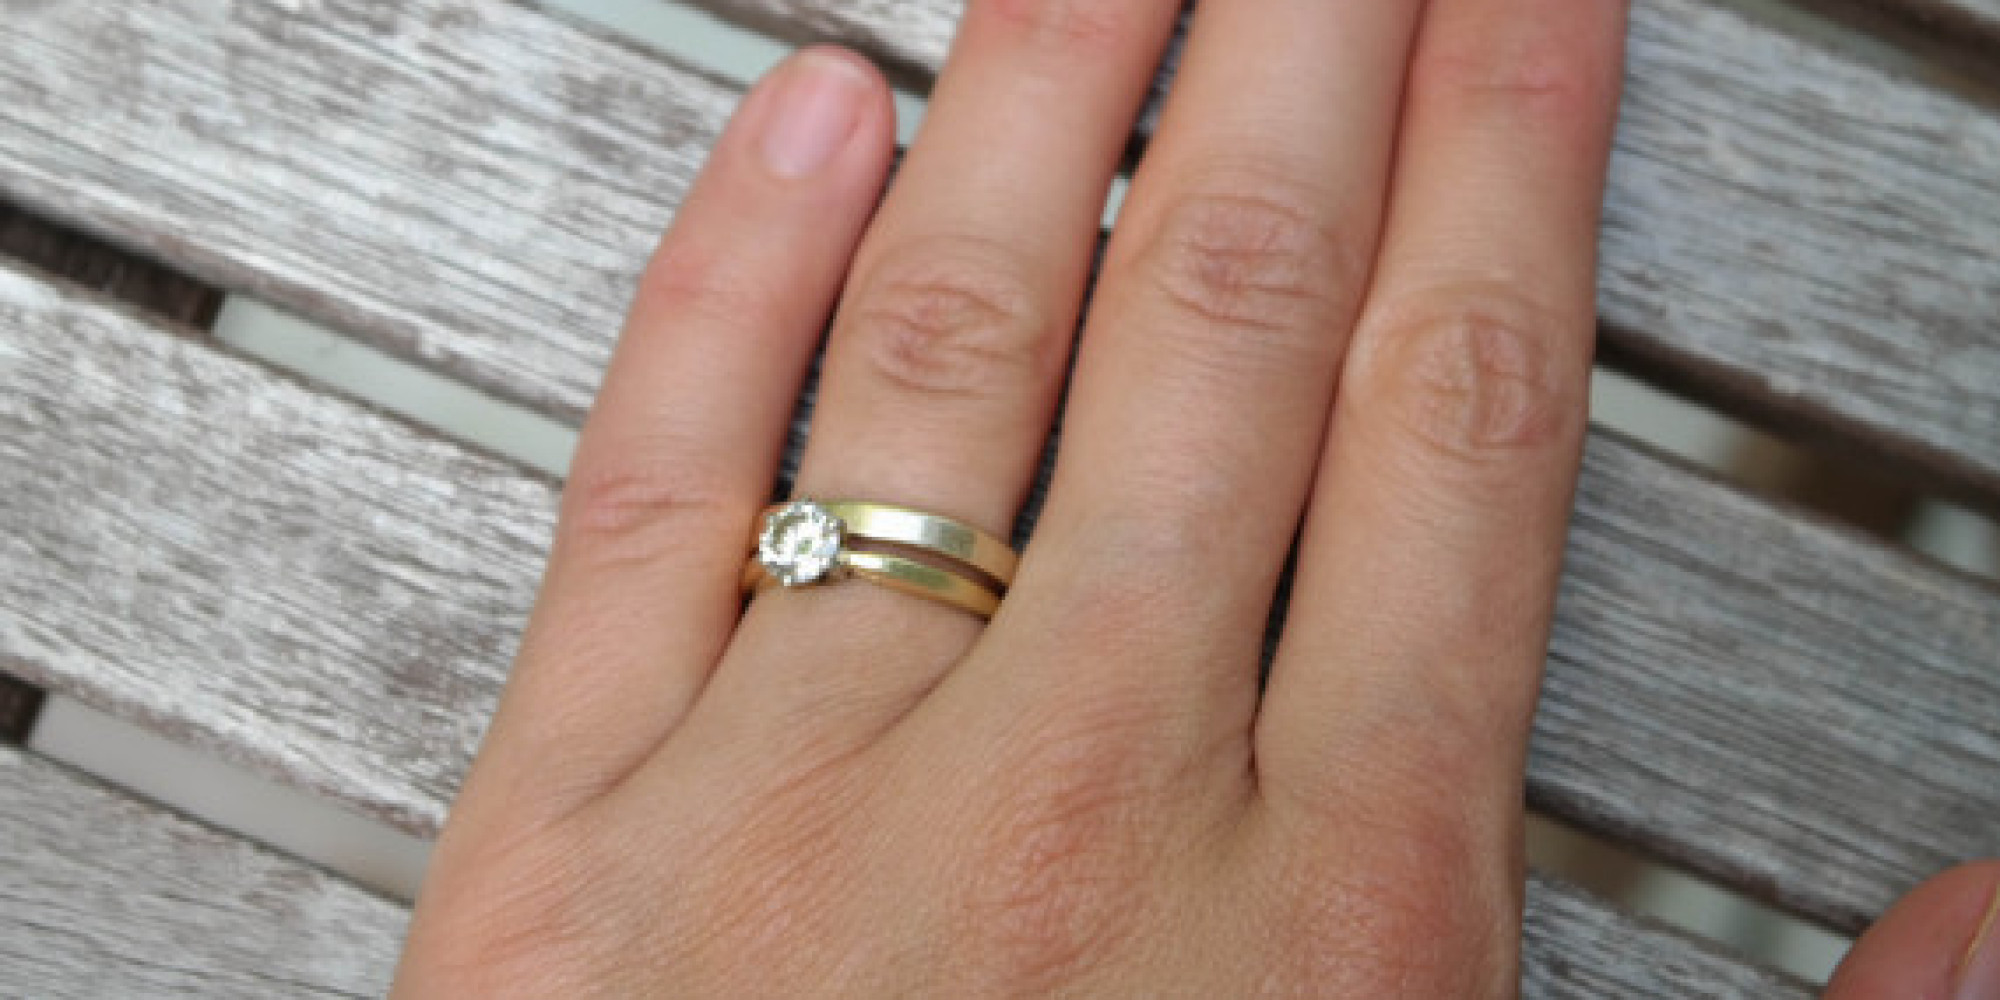 Proper Way To Wear Engagement And Wedding Rings
 Why I Don t Wear My Engagement Ring